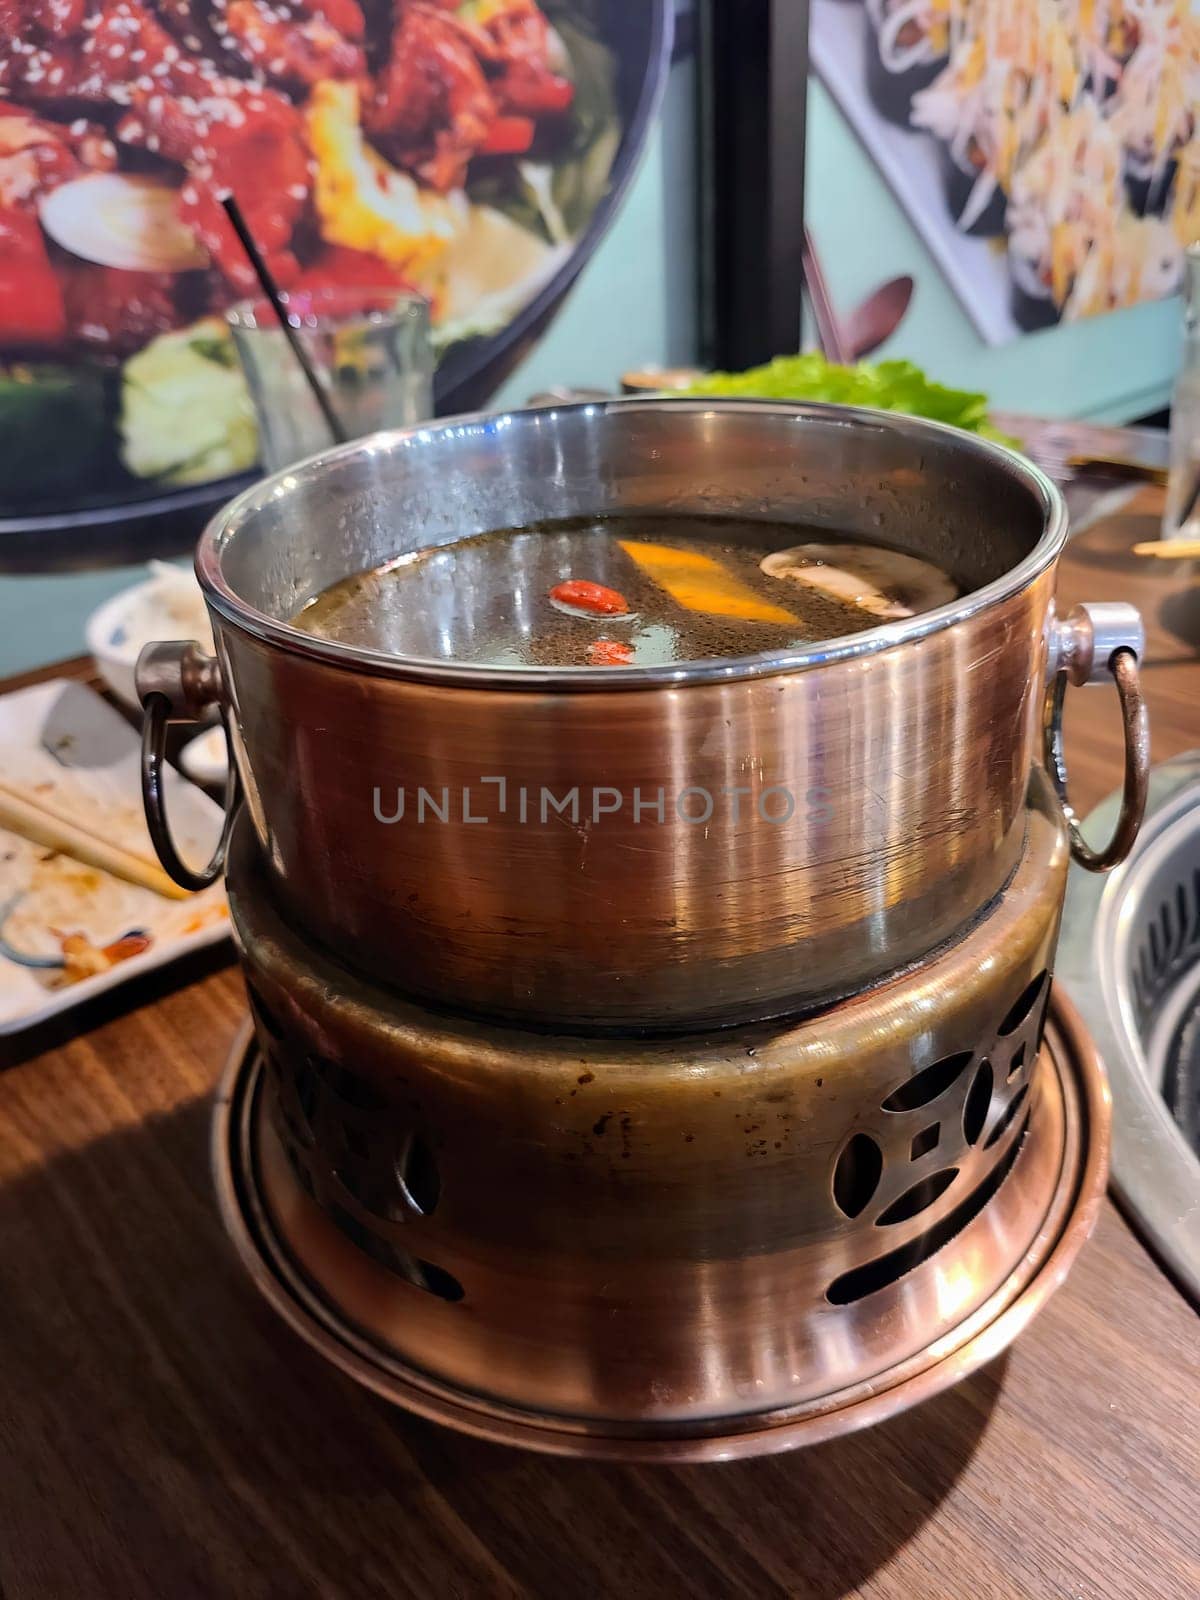 Steaming hot pot with mushrooms and goji berries in a cozy restaurant setting, showcasing communal dining in Fort Wayne, Indiana.